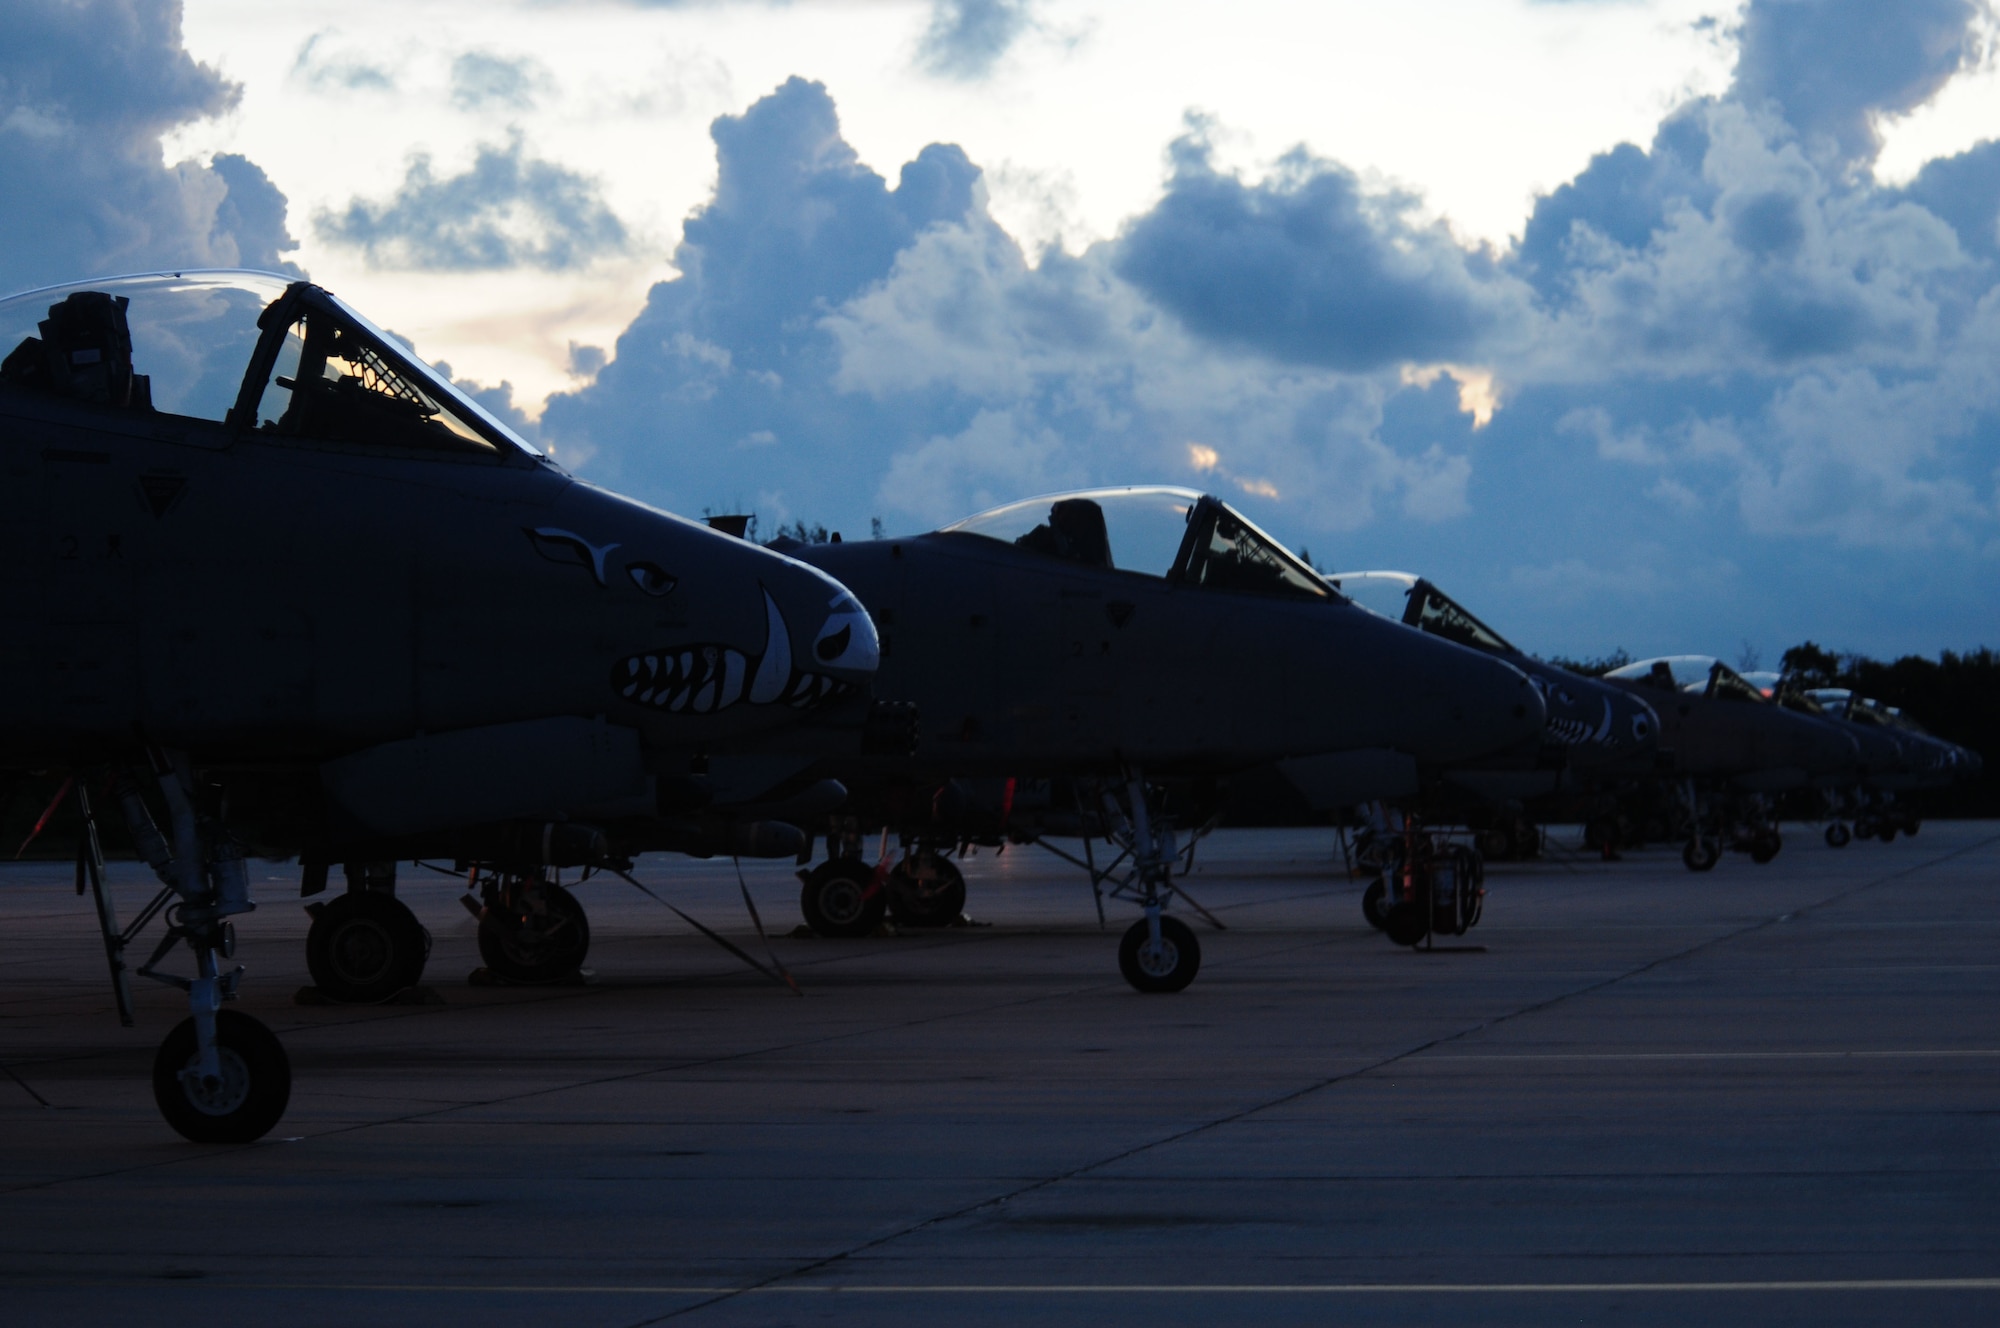 A-10 Thunderbolt II’s from the 47th Fighter Squadron sit on the flightline at Naval Air Station Key West, Florida during the 924th Fighter Group’s annual training, July 17. A total of 10 A-10’s and 232 personnel flew to the tropical environment to practice things they don’t normally do like flying over water and flying off of an island. (U.S. Air Force photo by Tech. Sgt. Courtney Richardson)